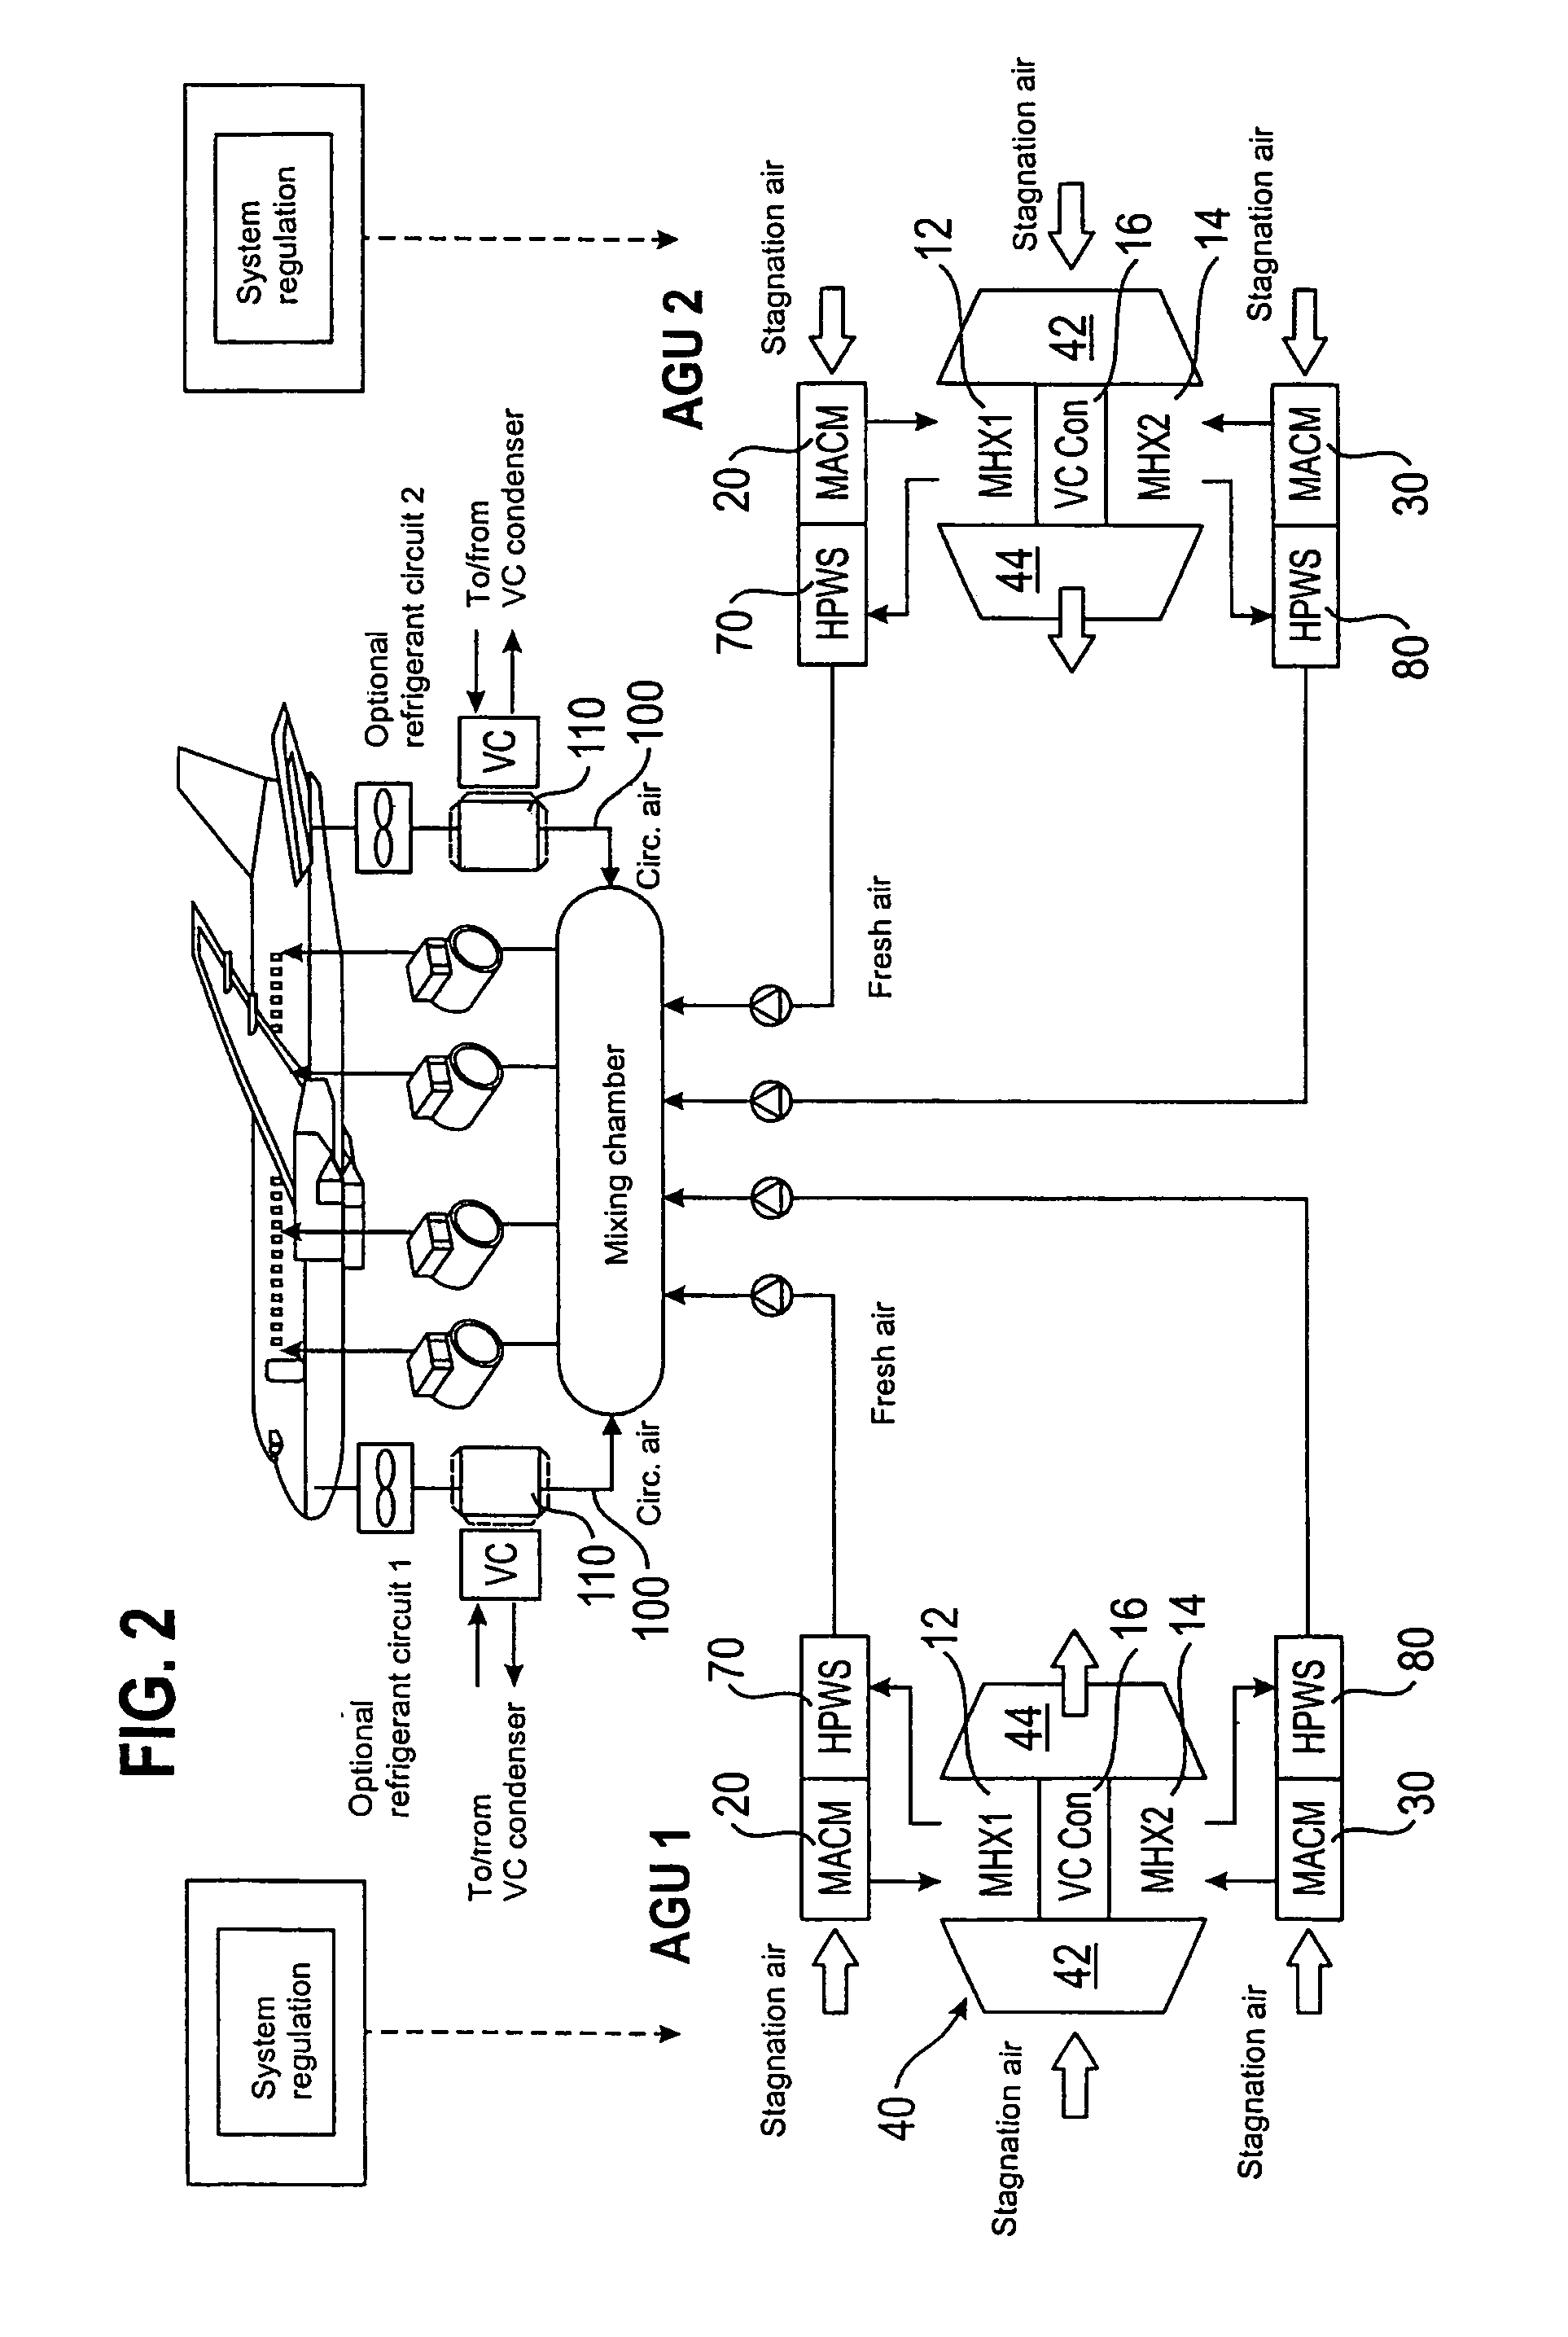 Air-conditioning system and a method for the preparation of air for the air-conditioning of a space